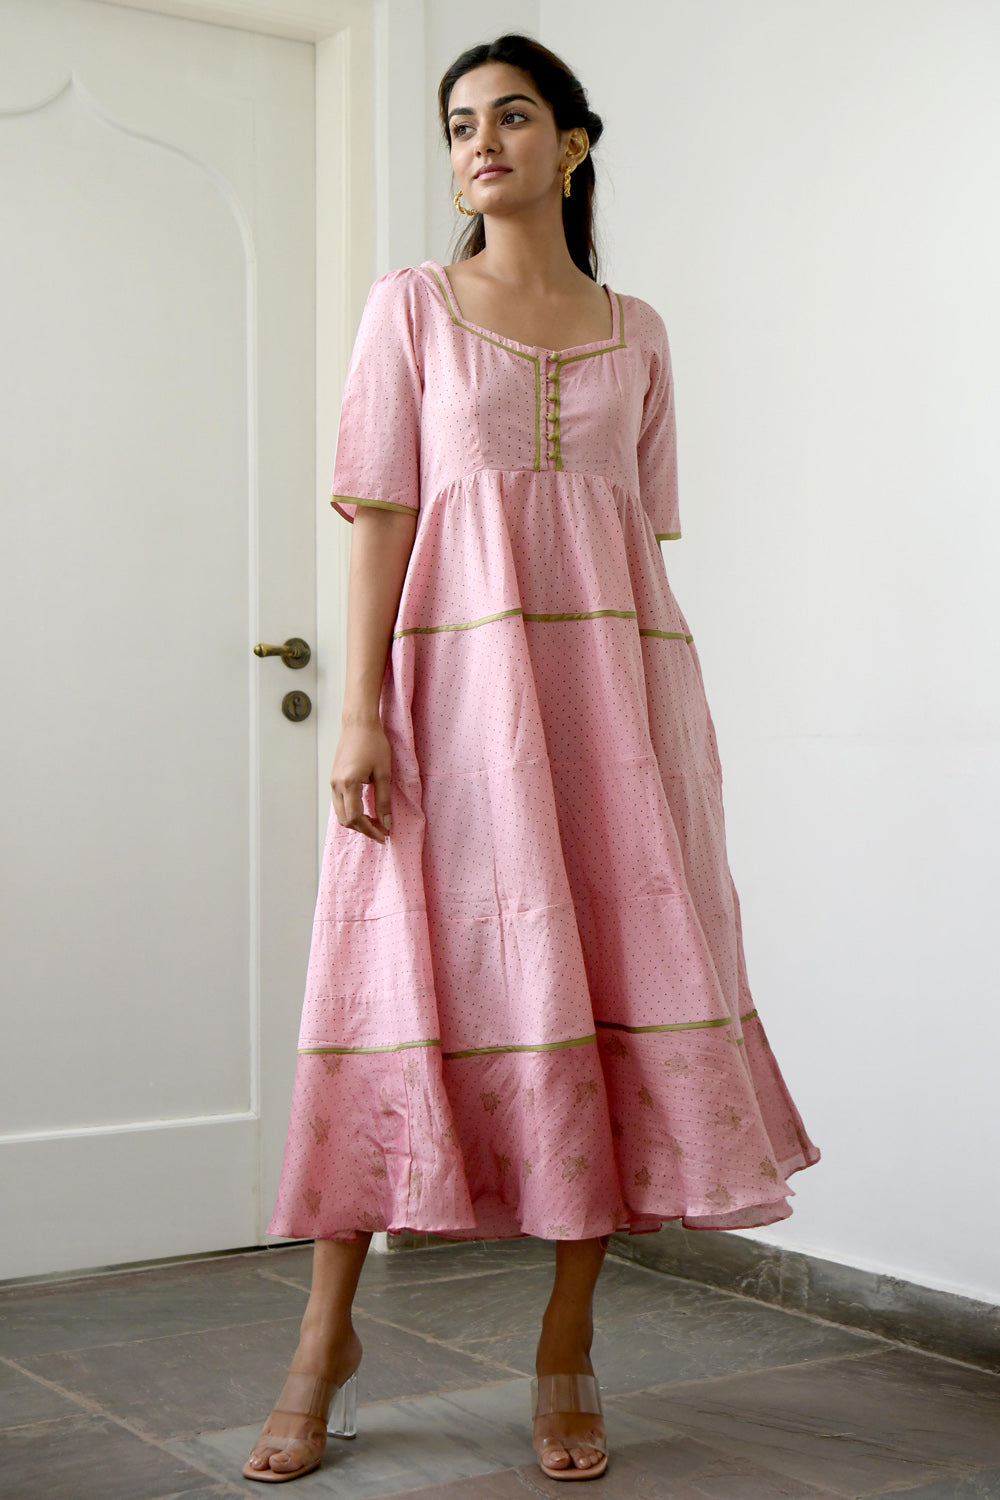 French Rose Dress